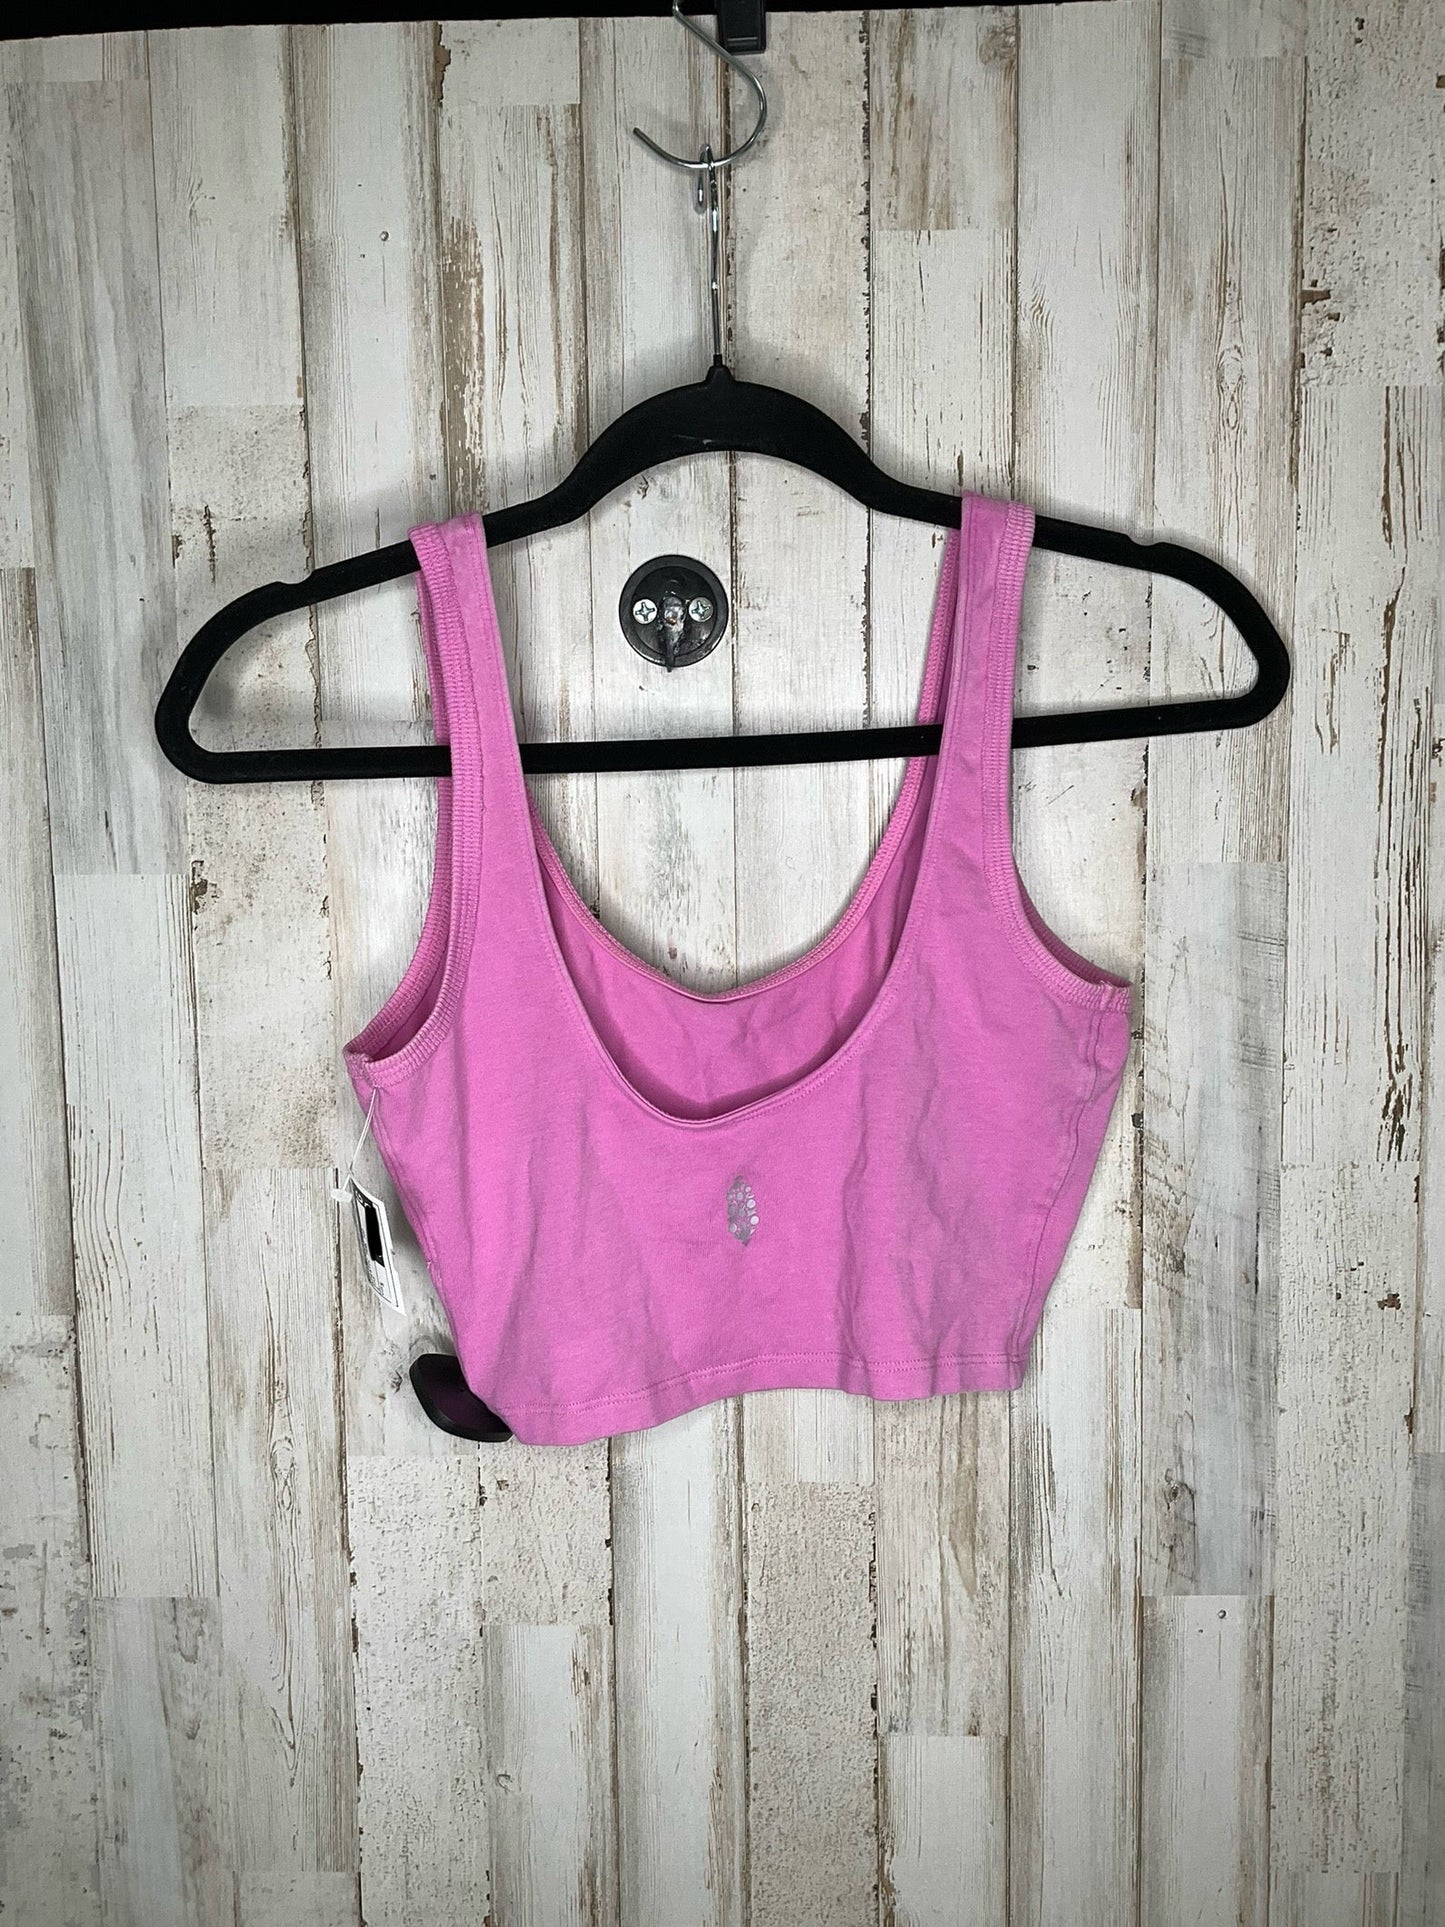 Pink Athletic Tank Top Free People, Size S